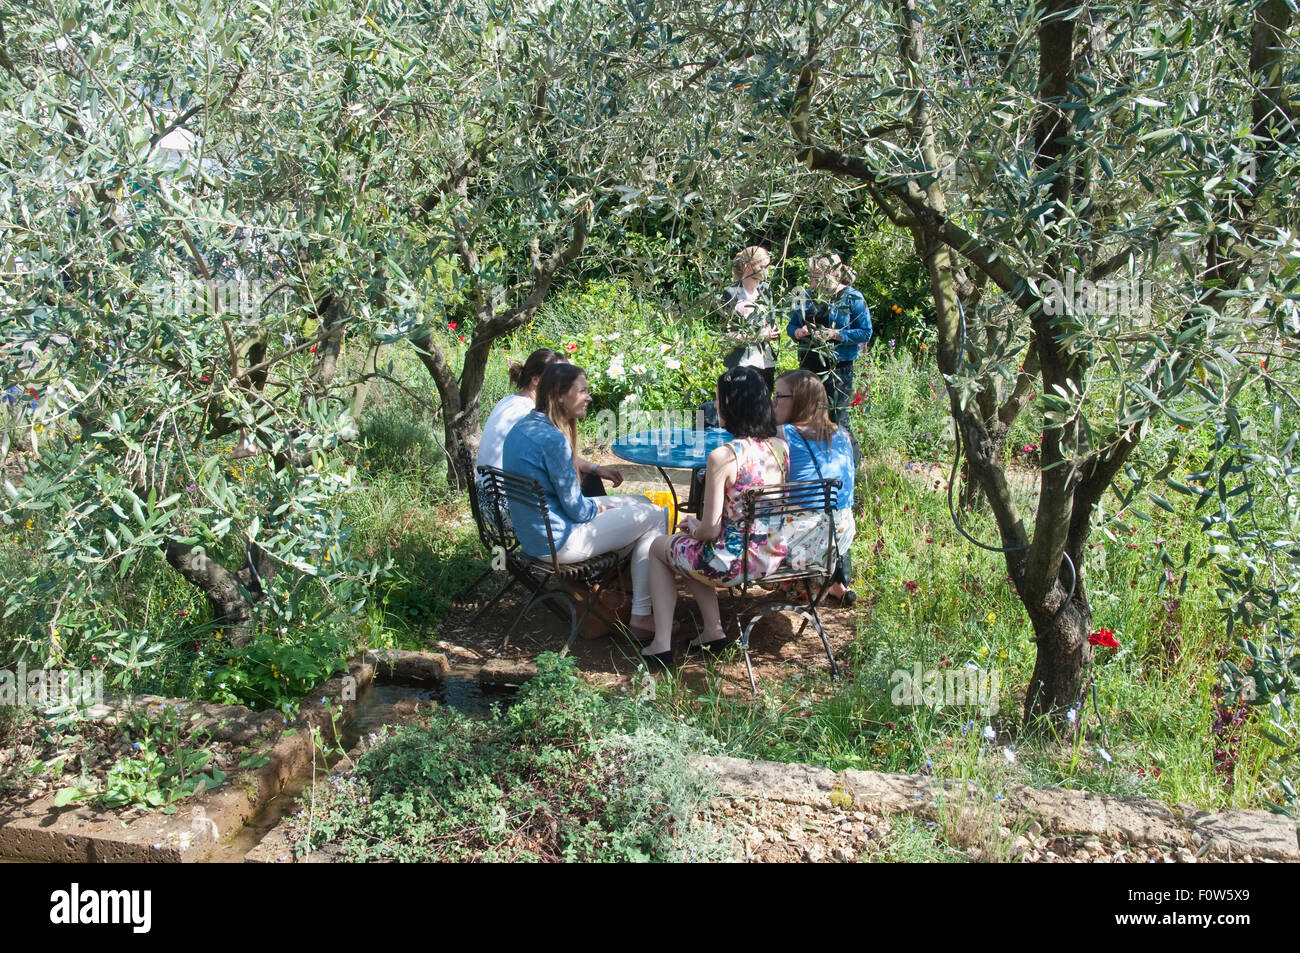 Perfumer's Garden ( L'Occitane en Provence ). An Olive Grove with a group  of young people at the Chelsea Flower Show 2015. UK Stock Photo - Alamy